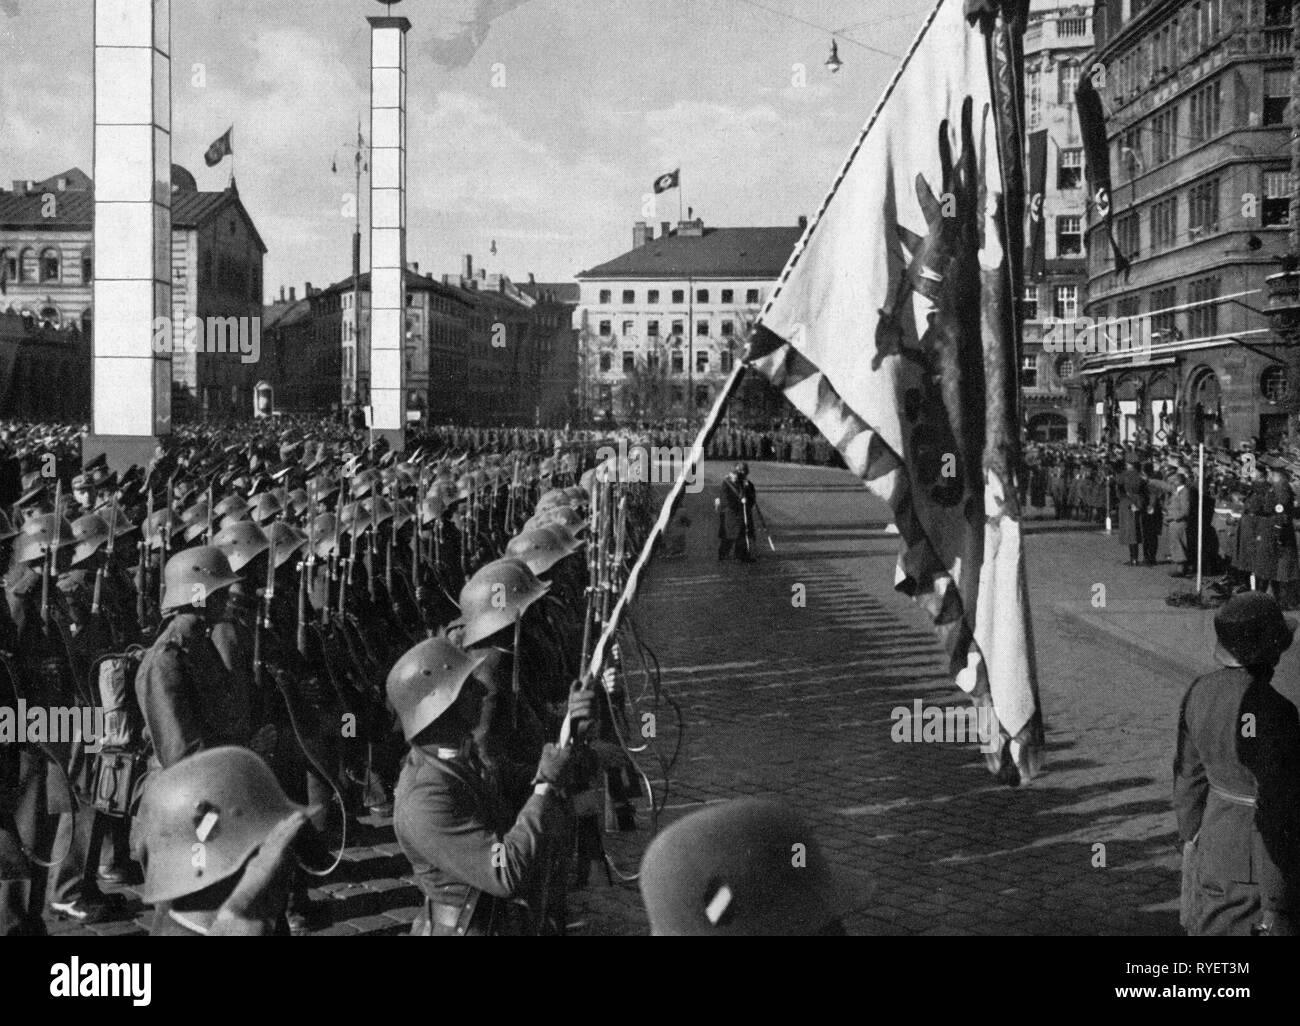 Nazism / National Socialism, politics, The Anschluss (Austrian Annexation) 1938, parade of Austrian soldiers, probably from infantry regiment 12 'Rainer' from Salzburg, station square, Munich, Germany, March 1938, Additional-Rights-Clearance-Info-Not-Available Stock Photo